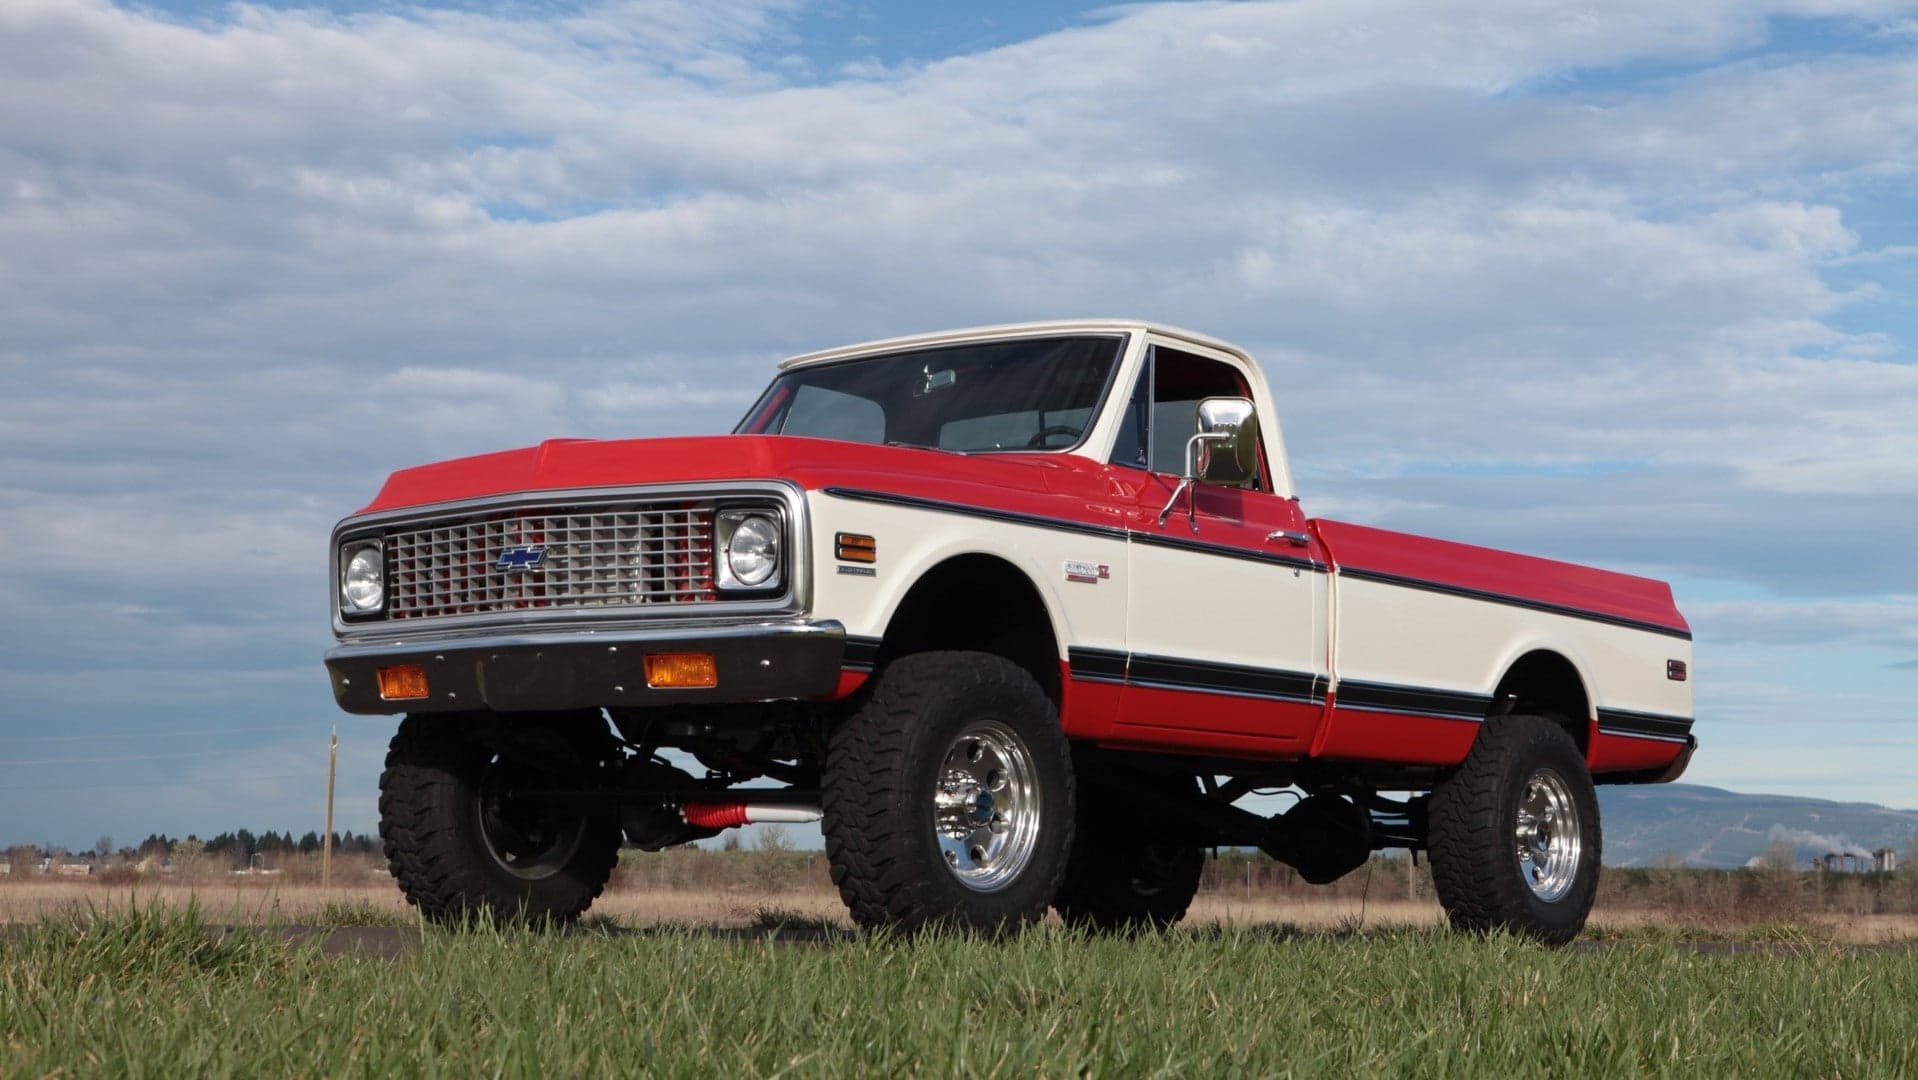 This 1972 Chevy Cheyenne Powered by a Supercharged LS V8 Is the Business